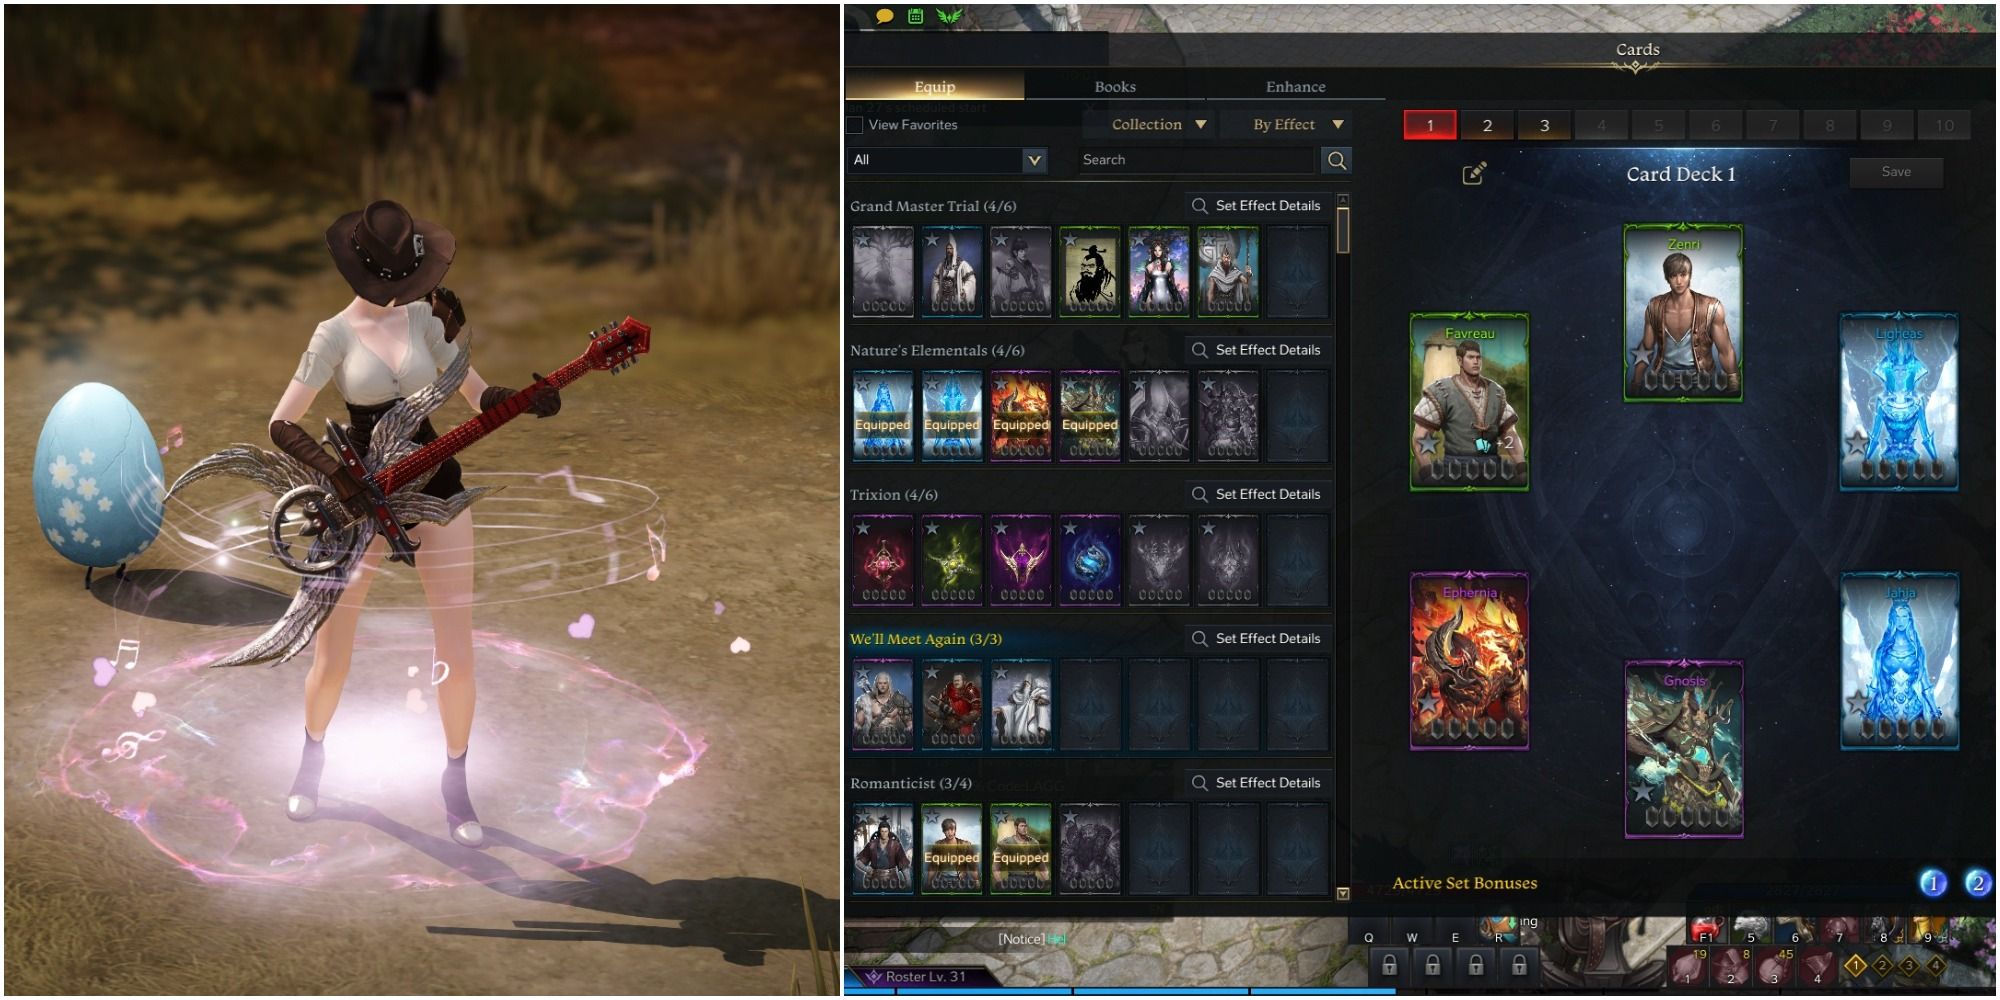 Lost Ark split image of player playing electric guitar and an open card menu 